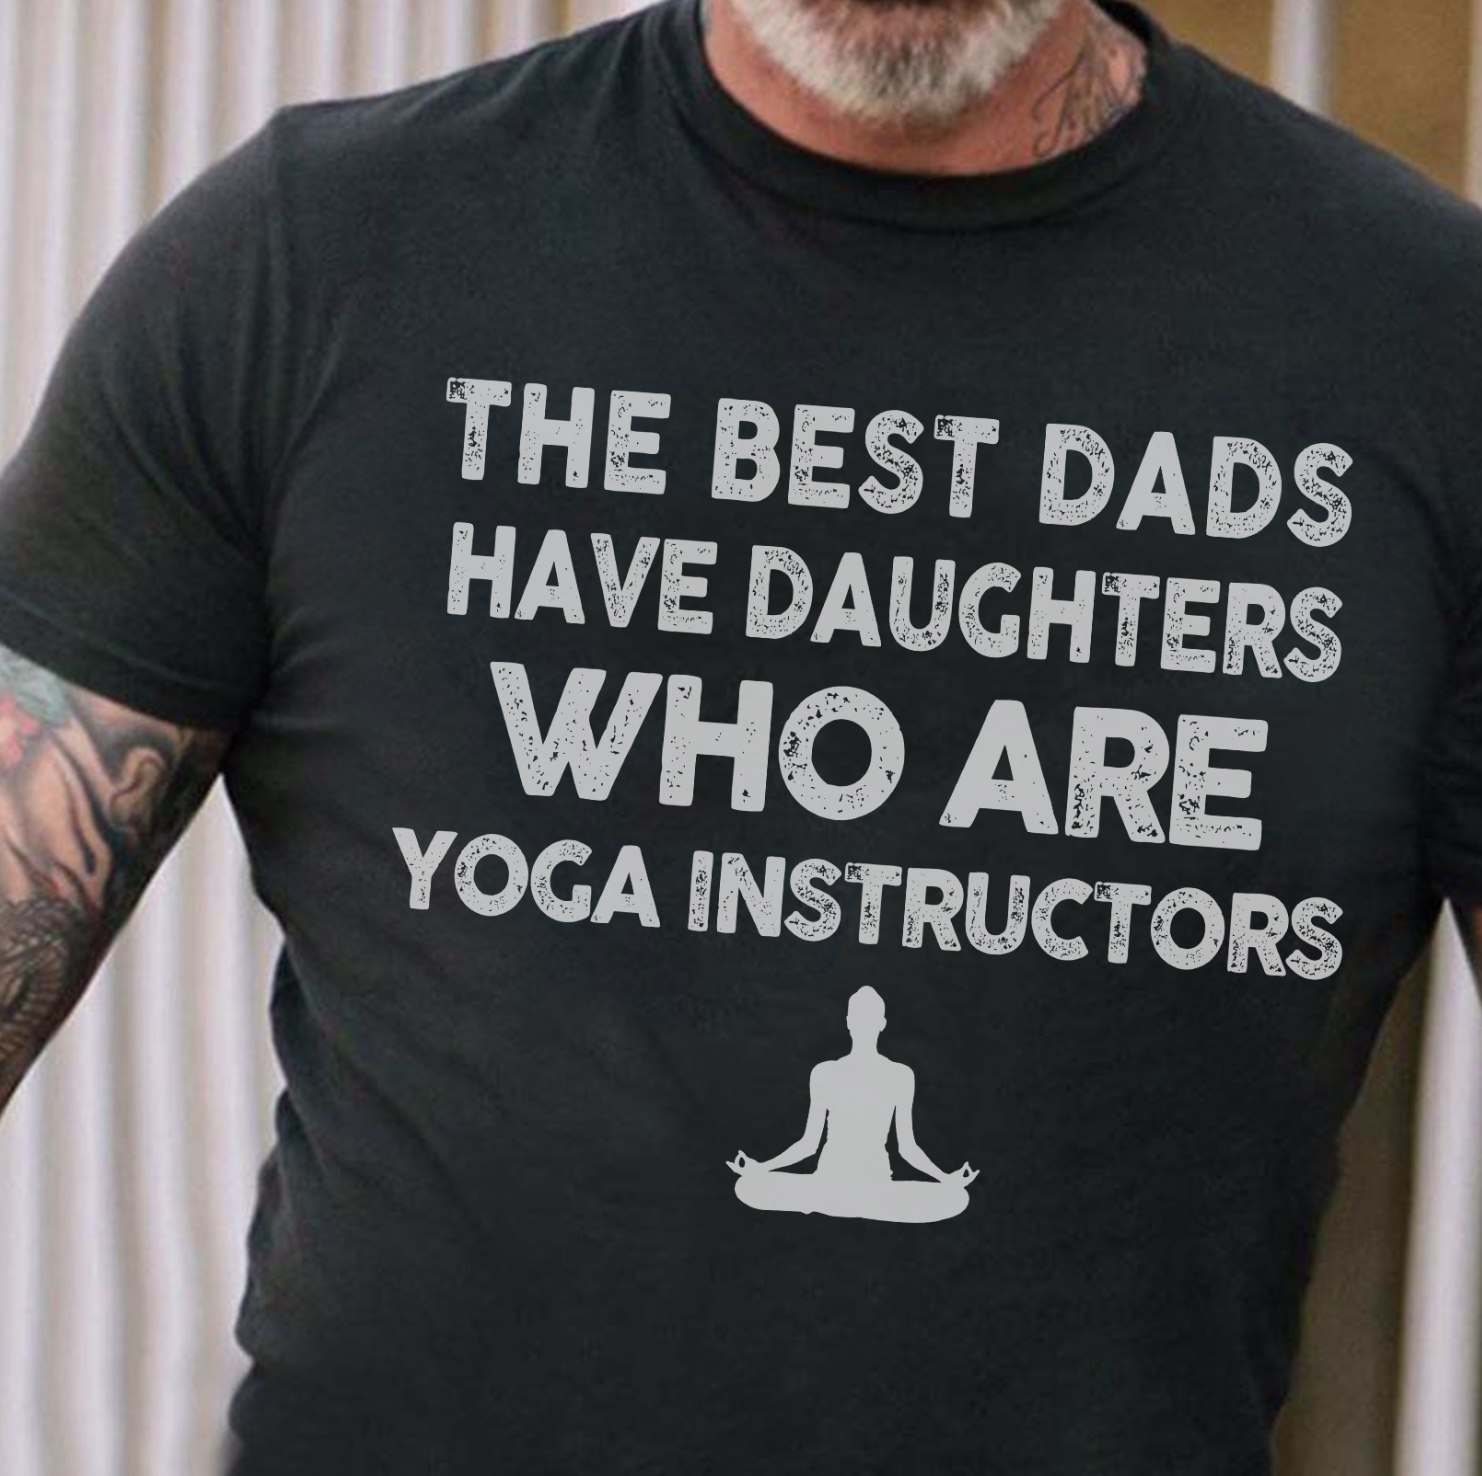 The best dads have daughters who are yoga instructors - Dad and daughter